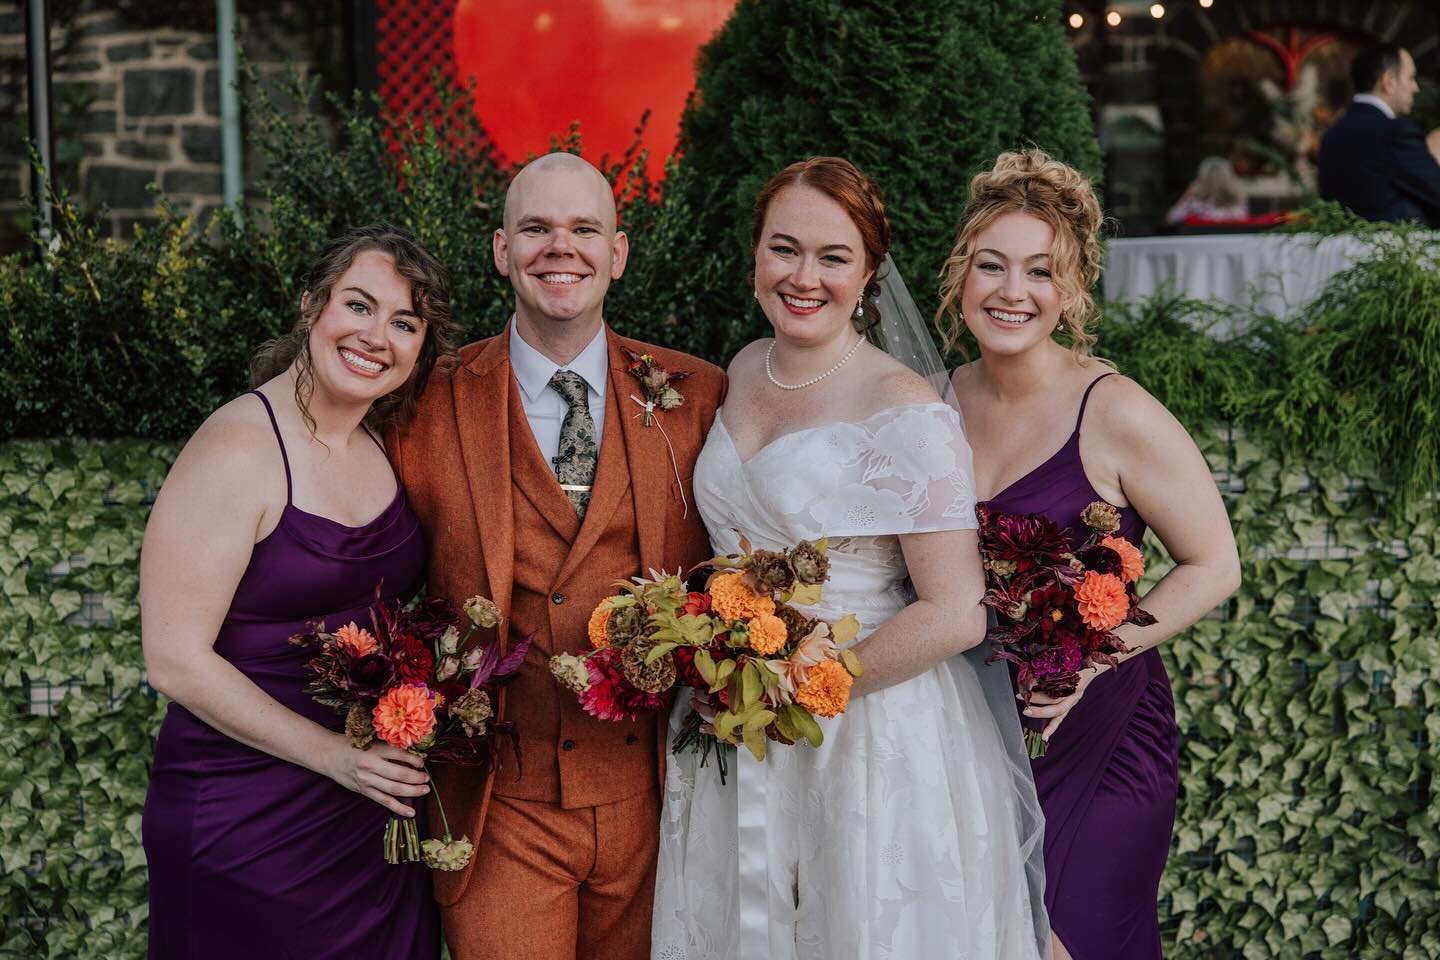 It&rsquo;s siblings day which feels like an awesome moment to spam you all with more wedding pics! My sisters are my favorites and I can&rsquo;t believe how lucky I am to have married into a family where I get EIGHT more siblings (not counting the in